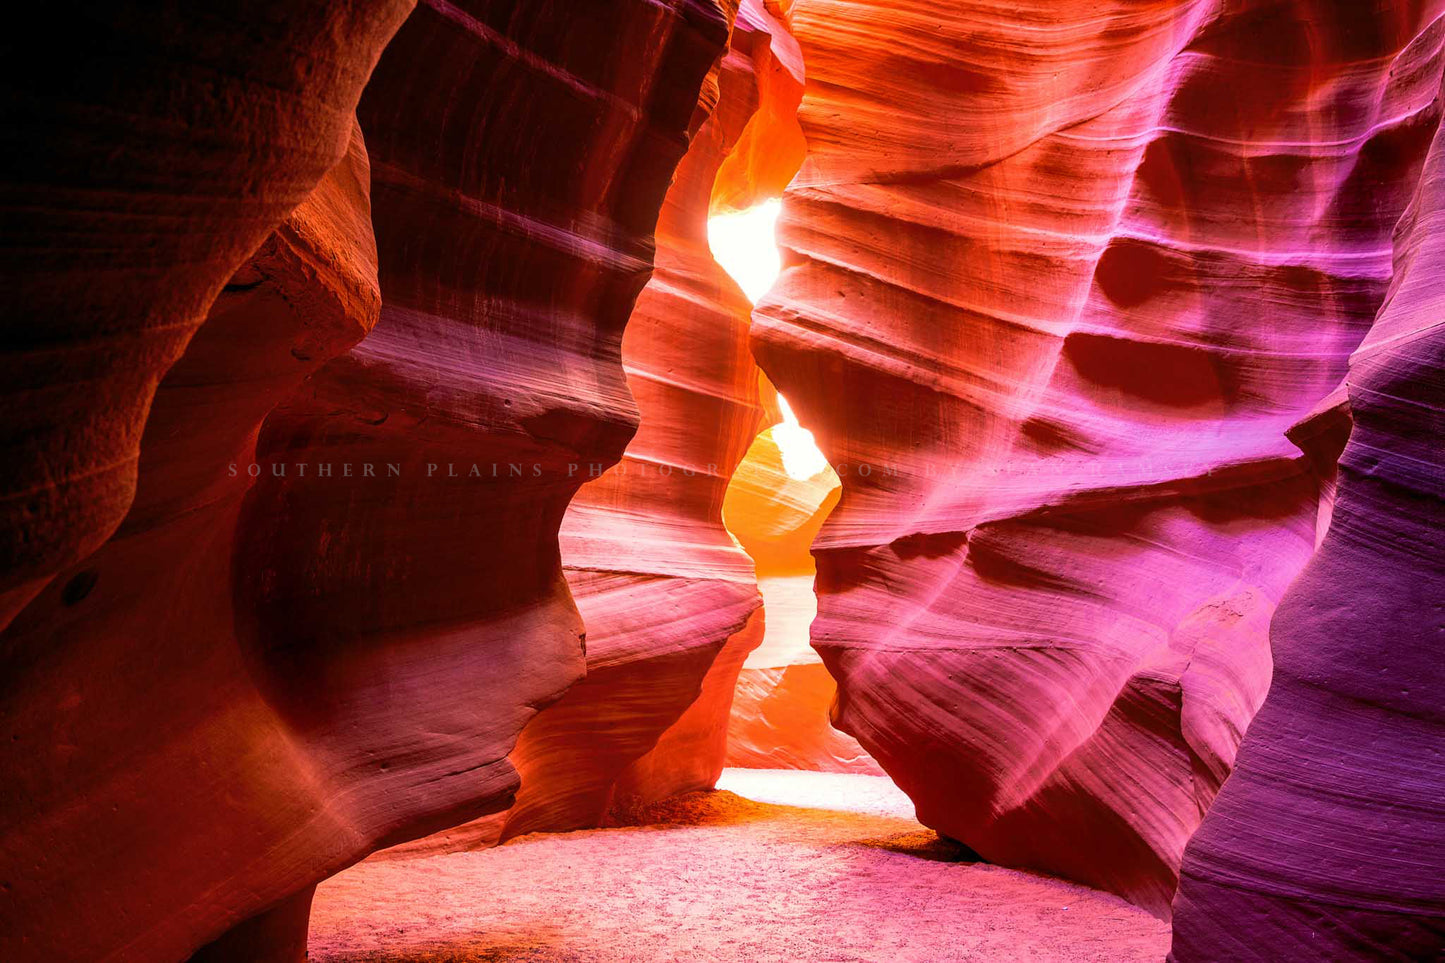 Desert southwest photography print of Antelope Canyon walls shaped as an hourglass leading to sunlight in Arizona by Sean Ramsey of Southern Plains Photography.